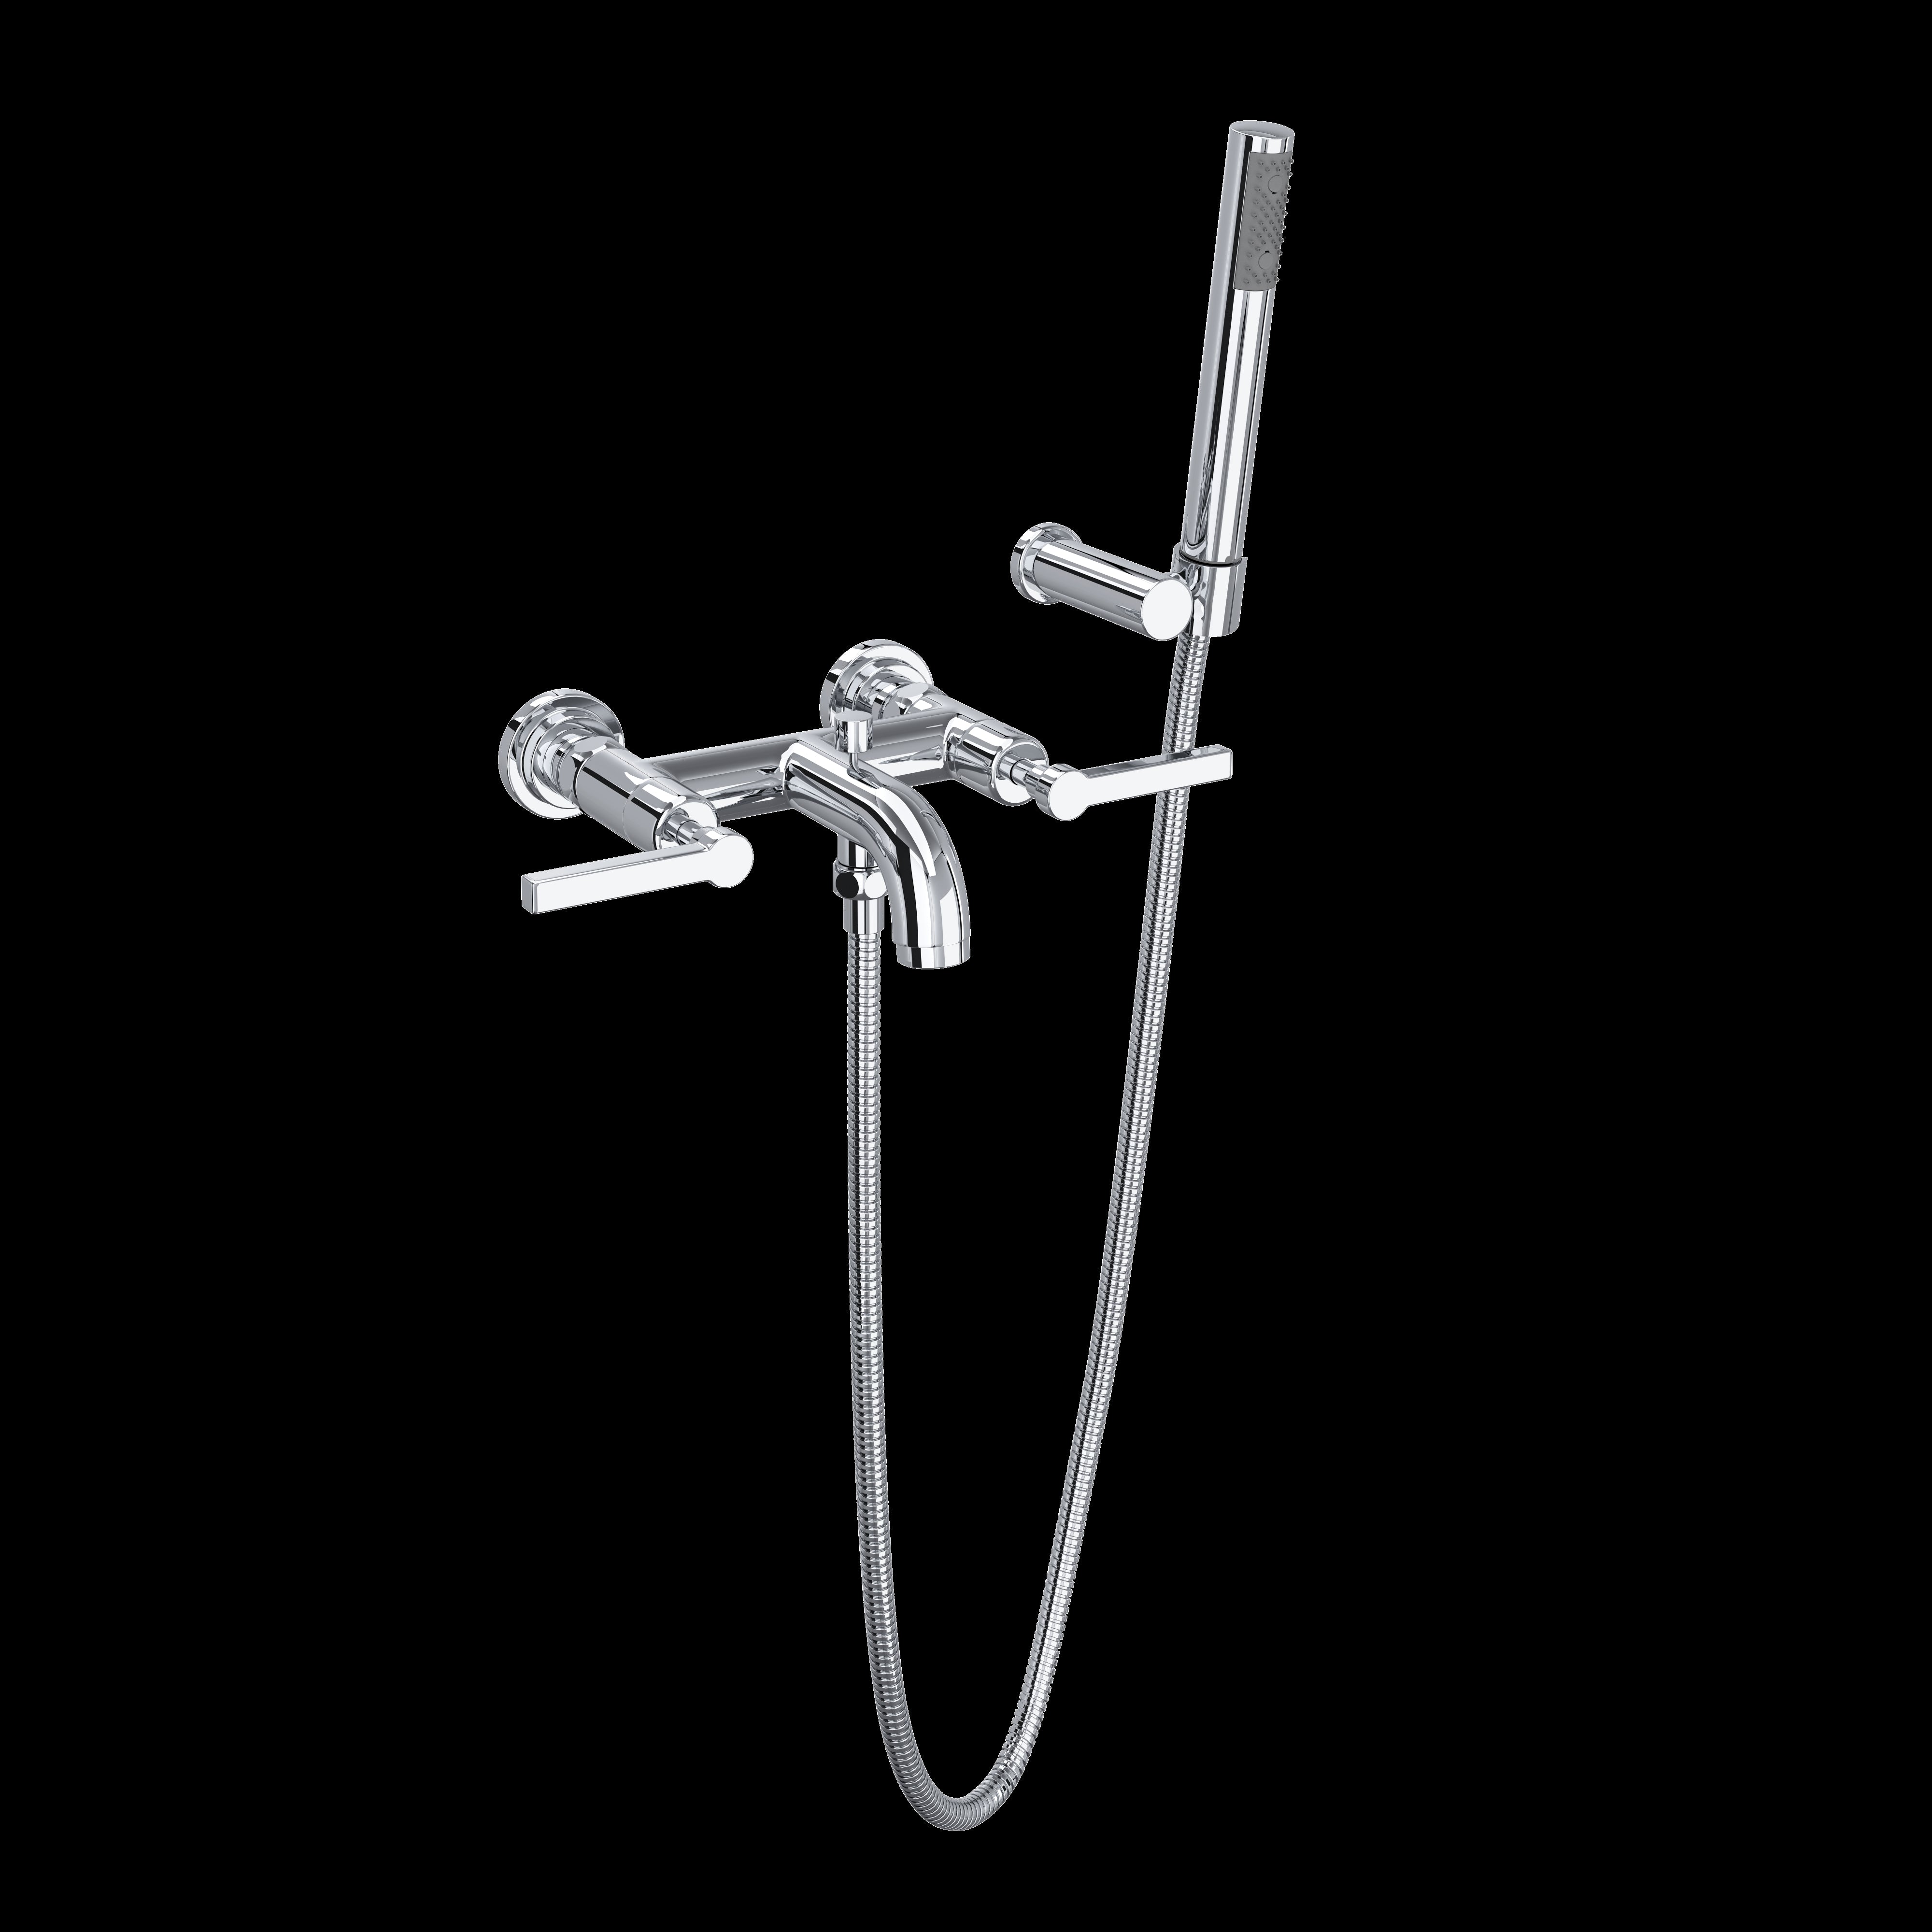 ROHL A2202 Lombardia Exposed Wall Mount Tub Filler